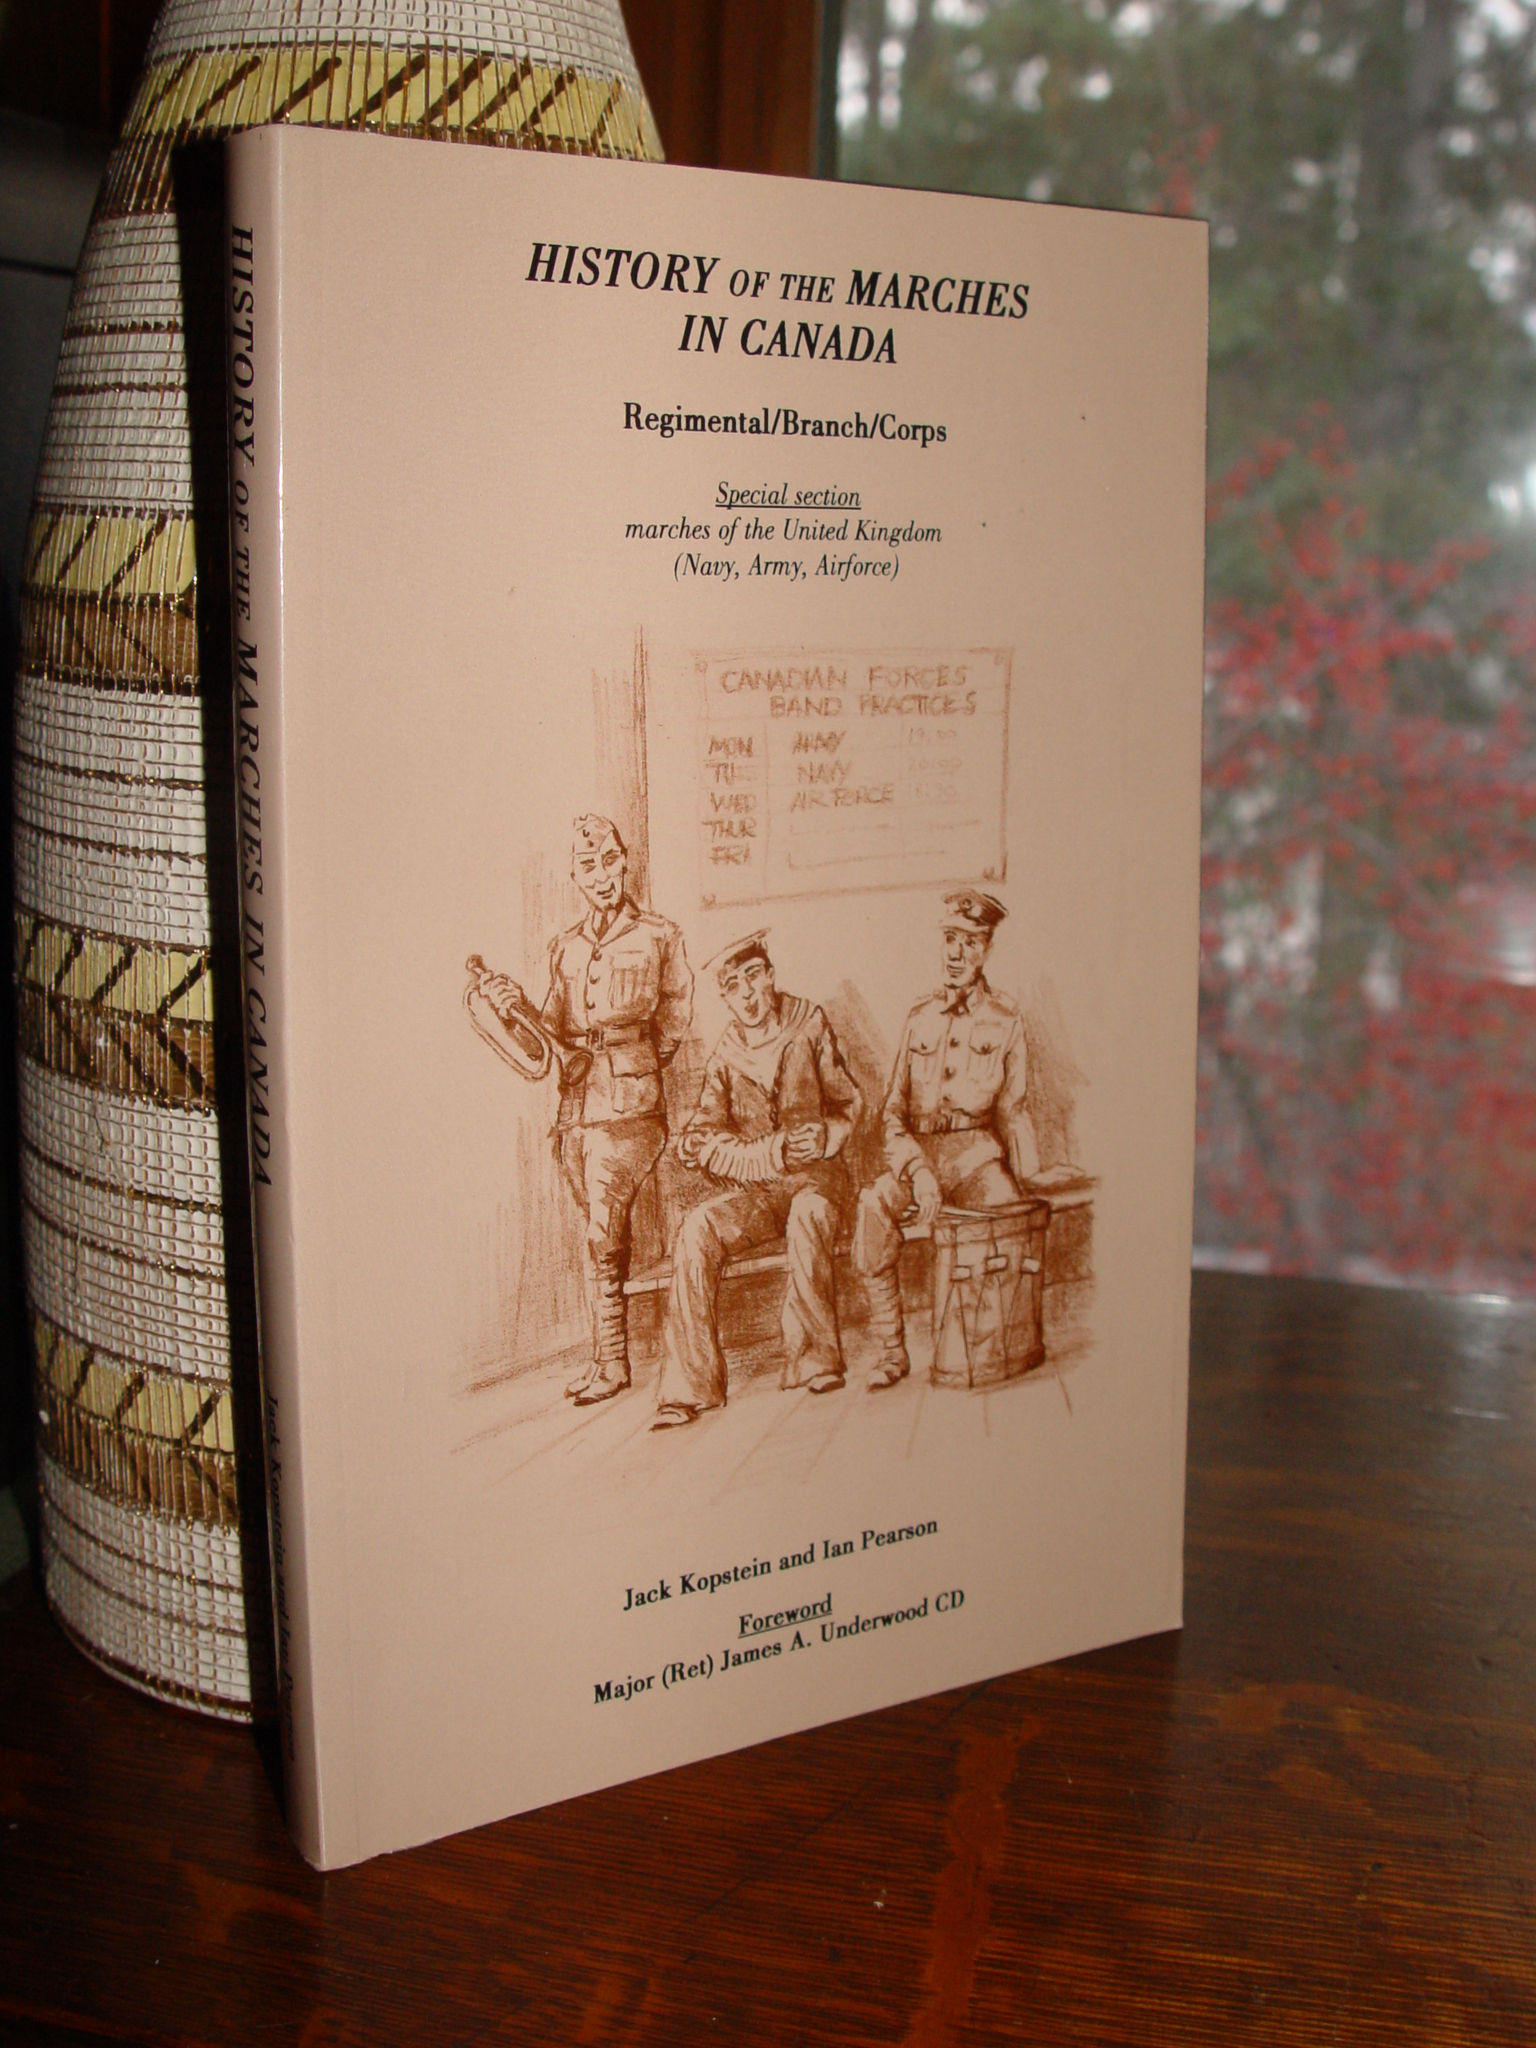 The History of the Marches in Canada 1994 :
                        Regimental / Branch / Corps; Bands, Military
                        Music in Canada Jack Kopstein